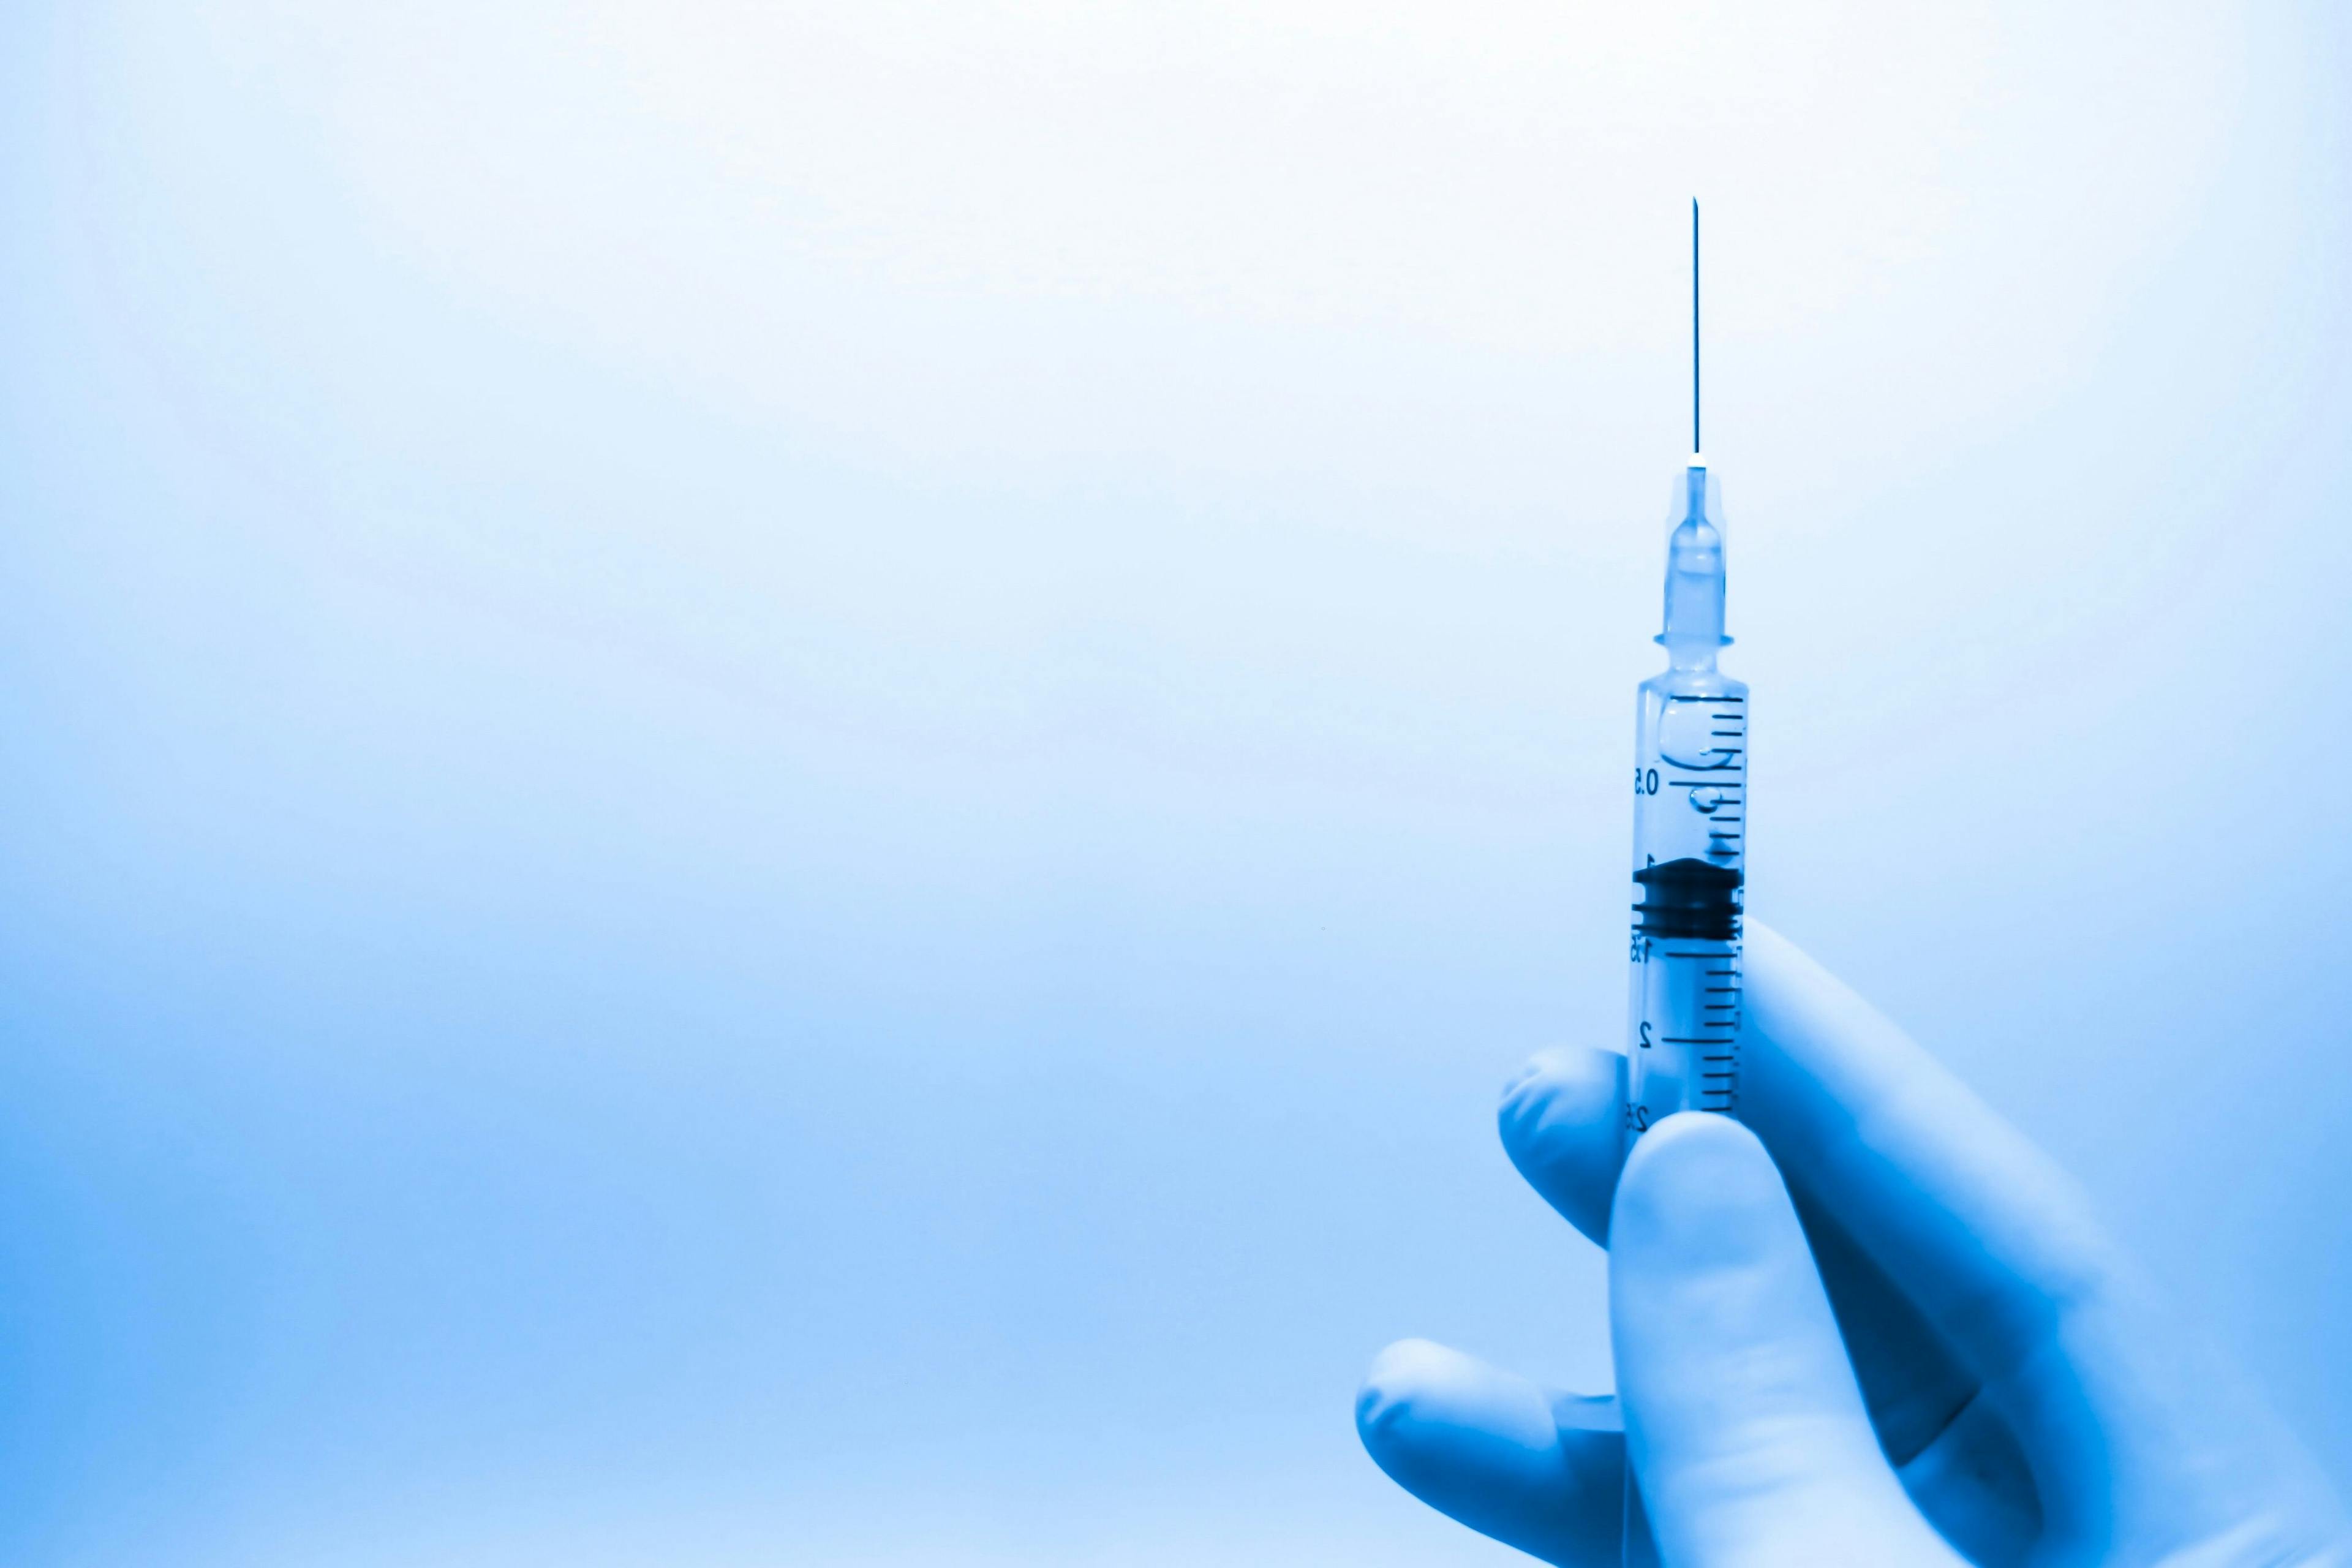 POLL: Should COVID-19 Vaccinations be Required at Conferences?